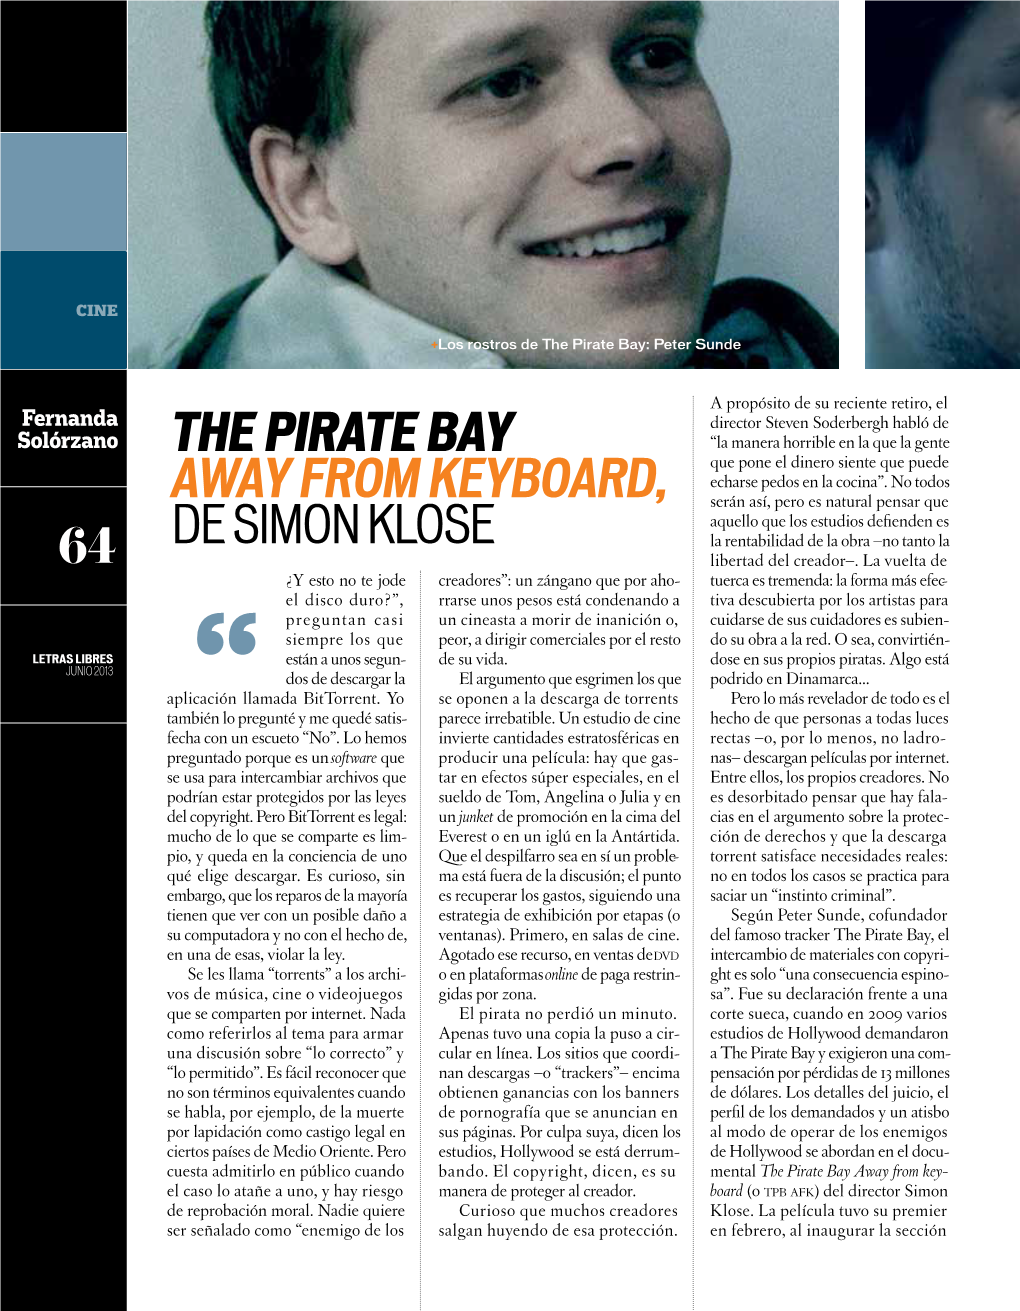 The Pirate Bay Away from Keyboard, De Simon Klose